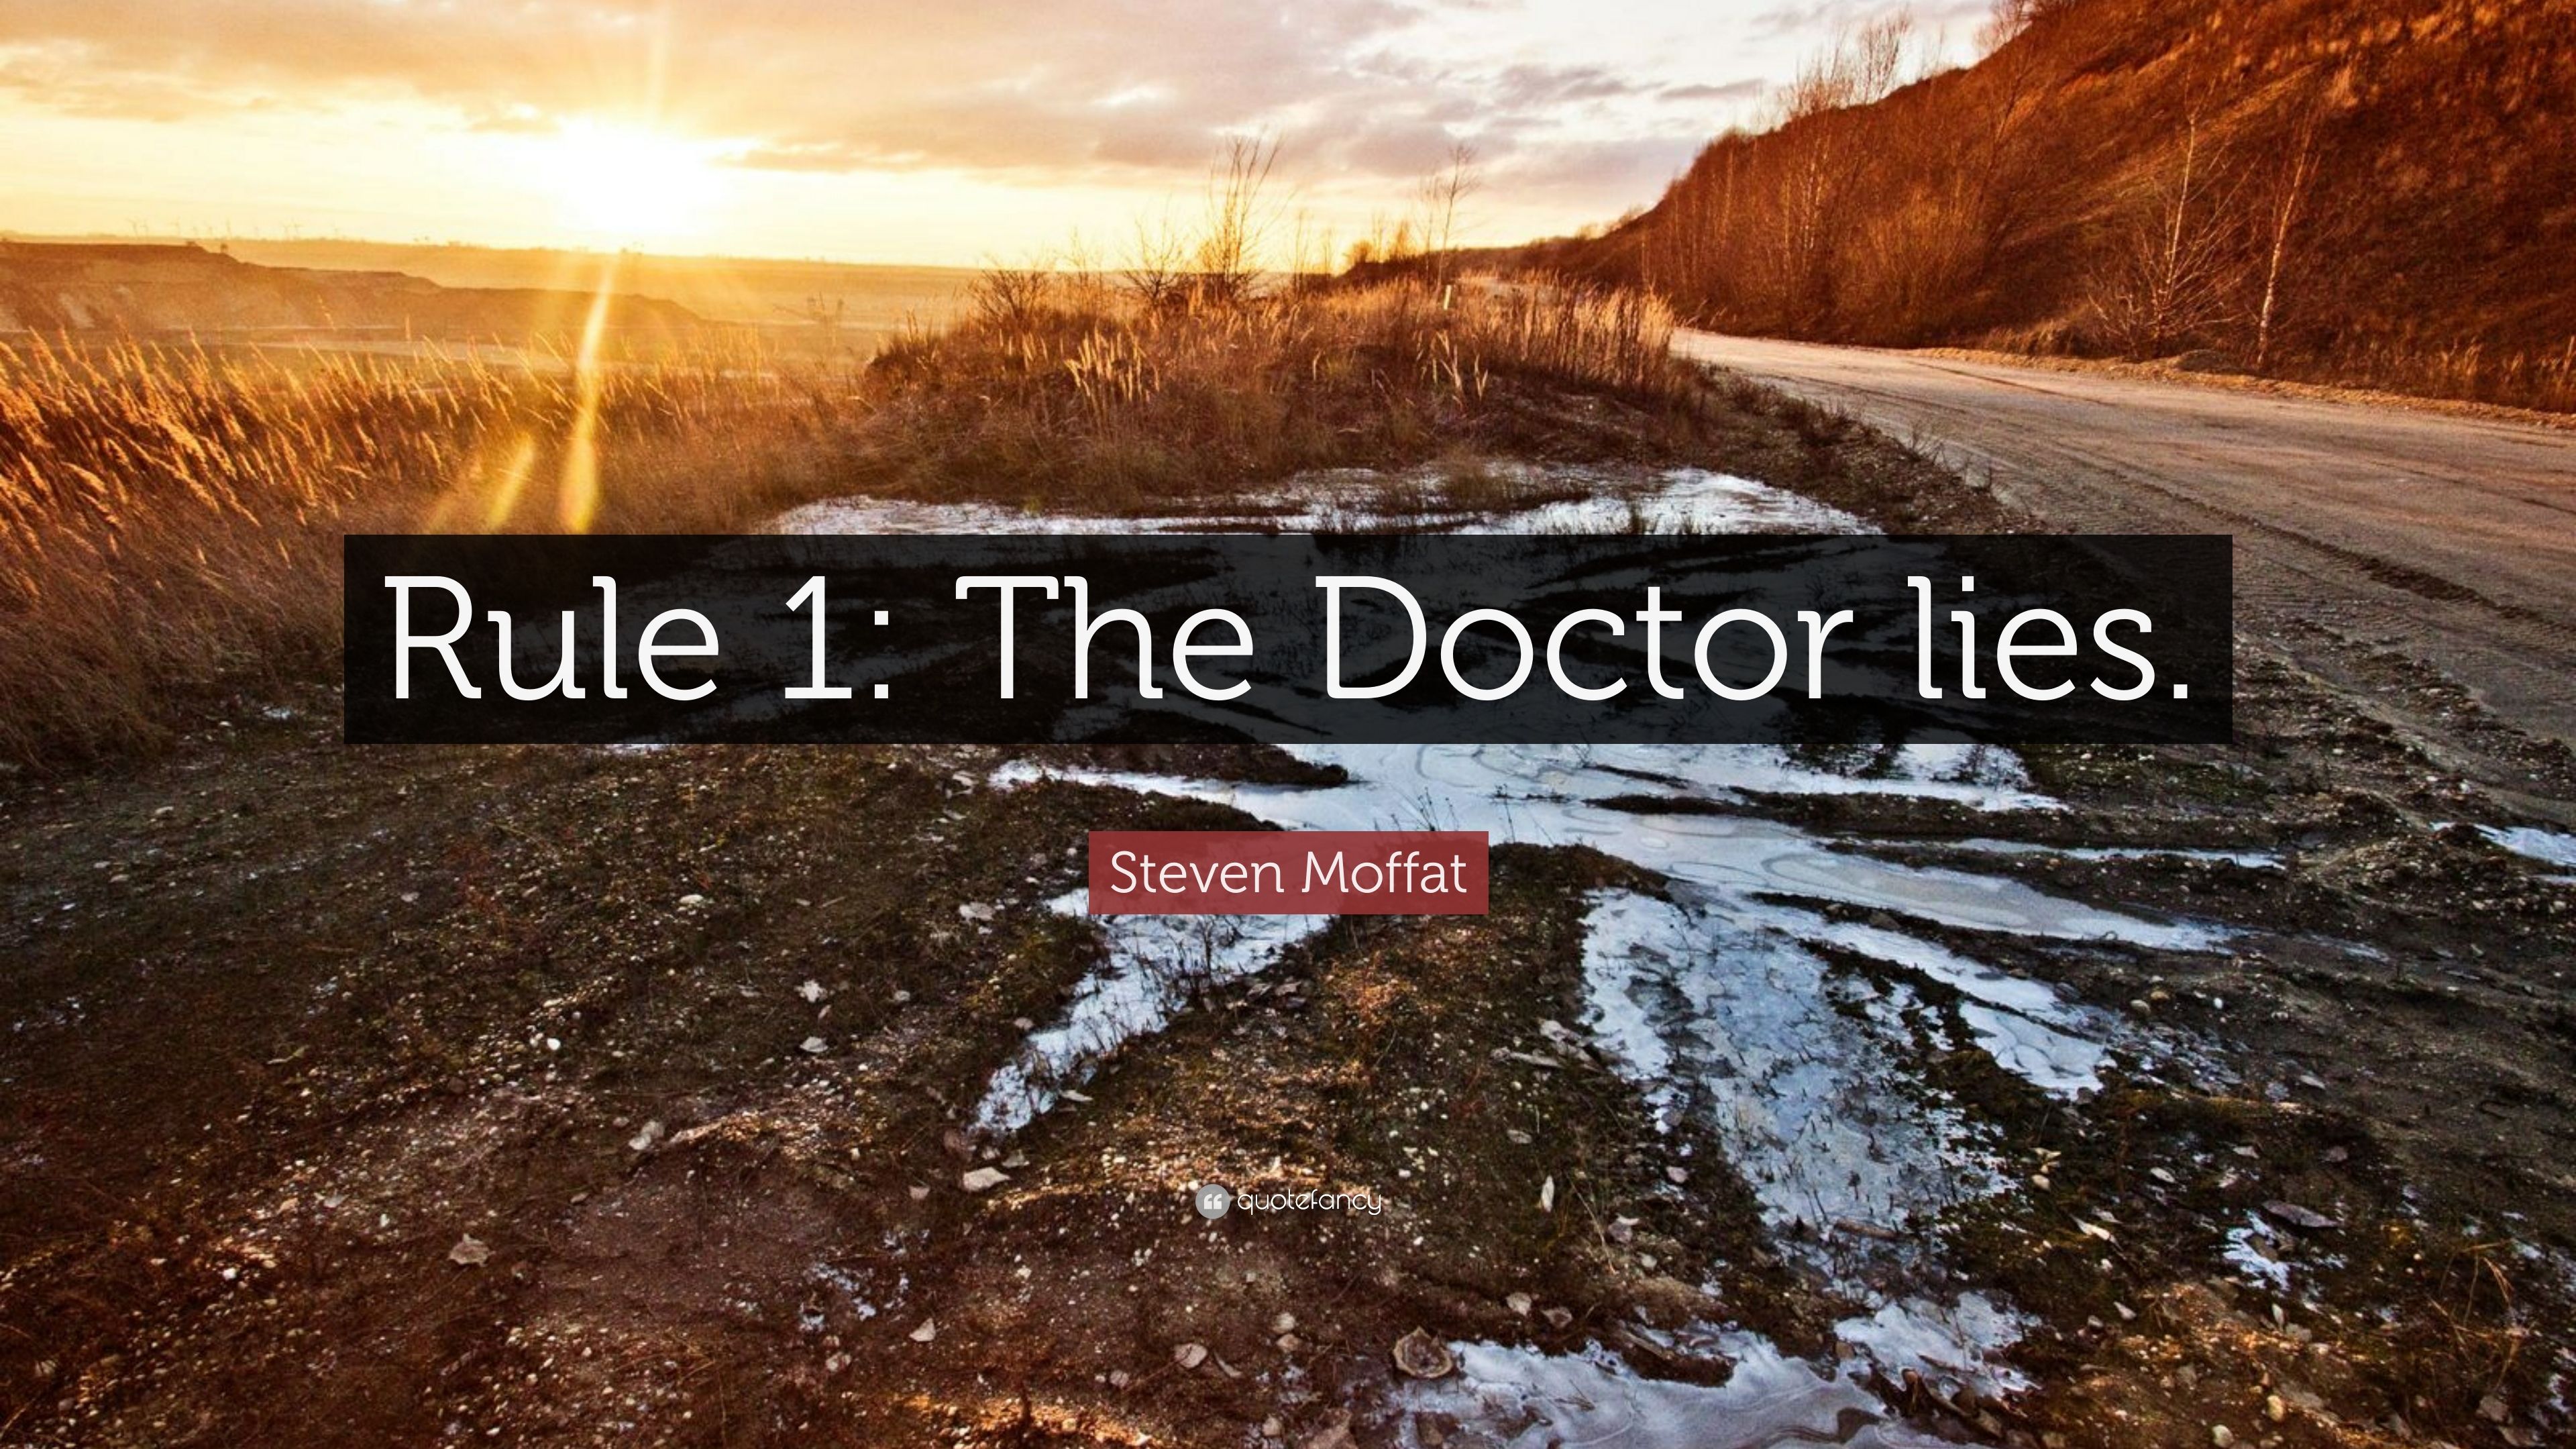 Steven Moffat Quote: “Rule 1: The Doctor lies.” 9 wallpaper